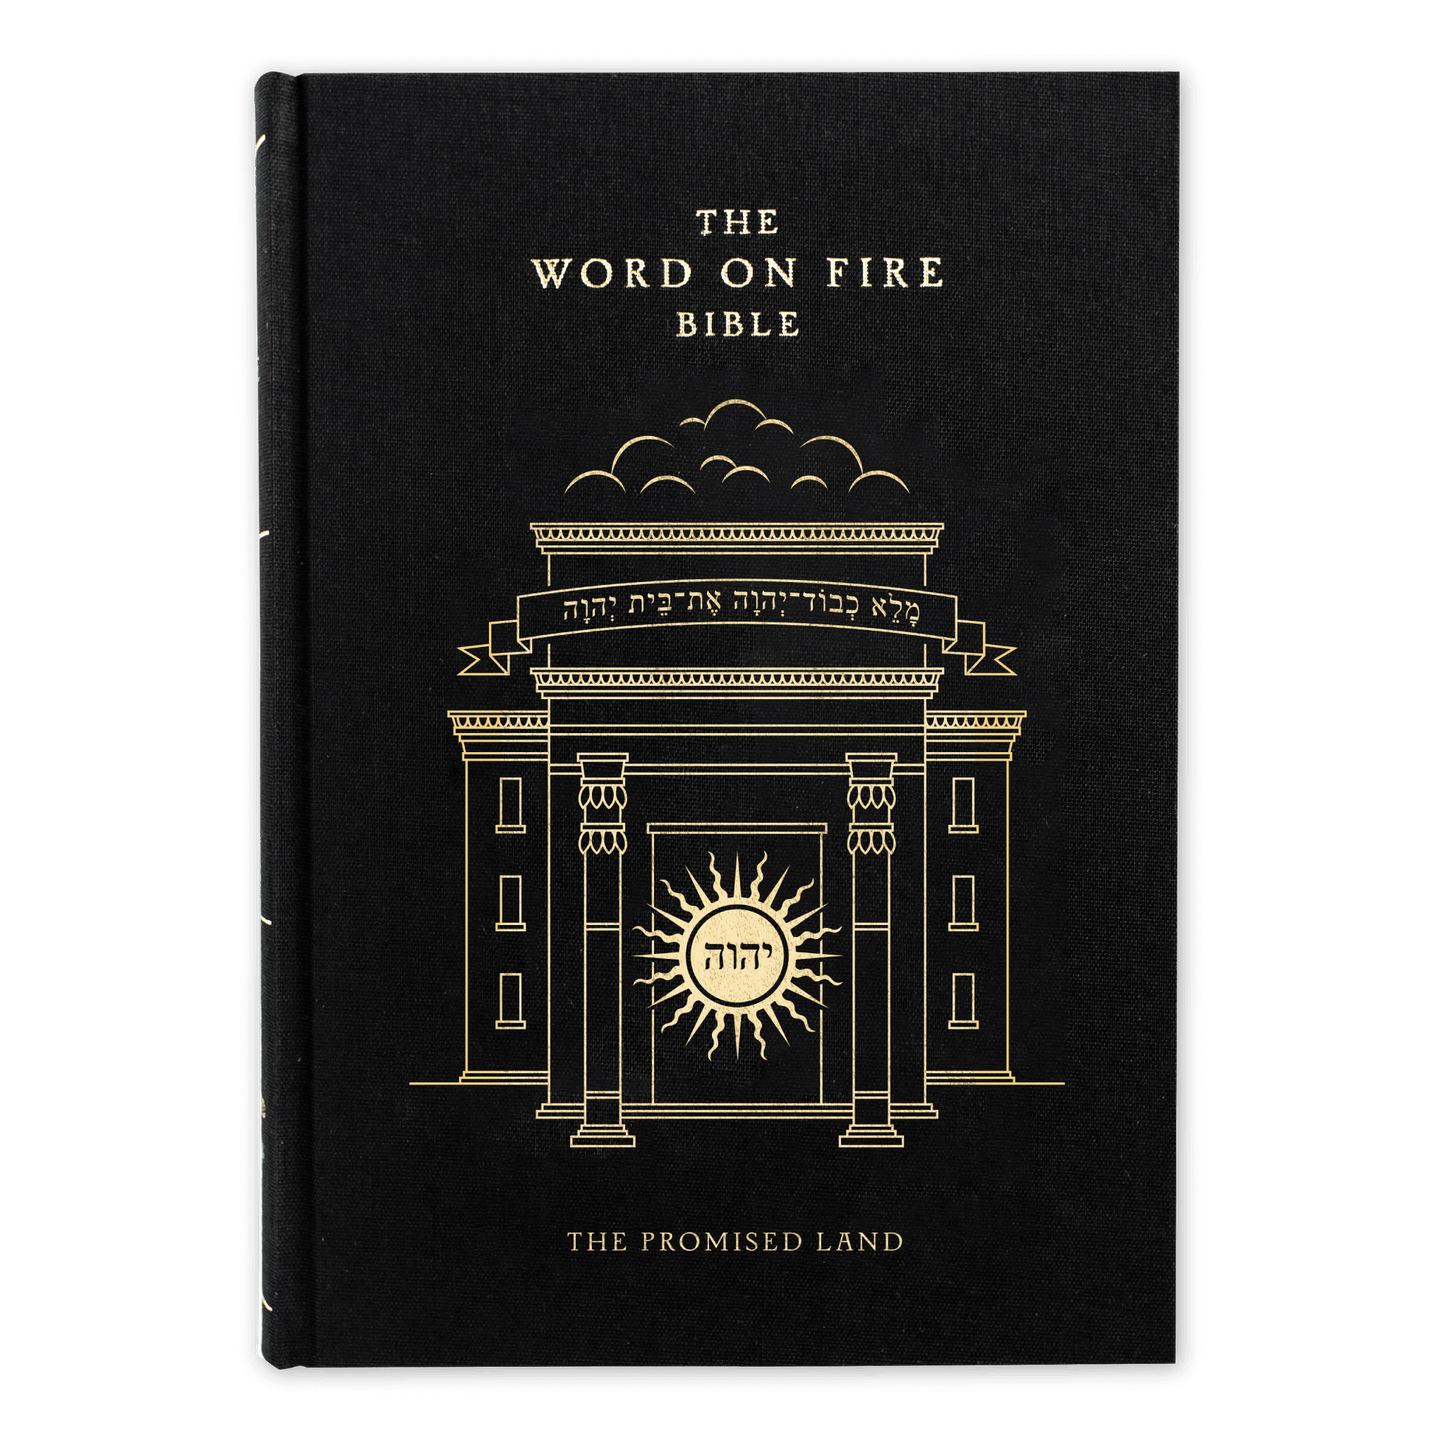 The Word on Fire Bible (Volume IV): The Promised Land